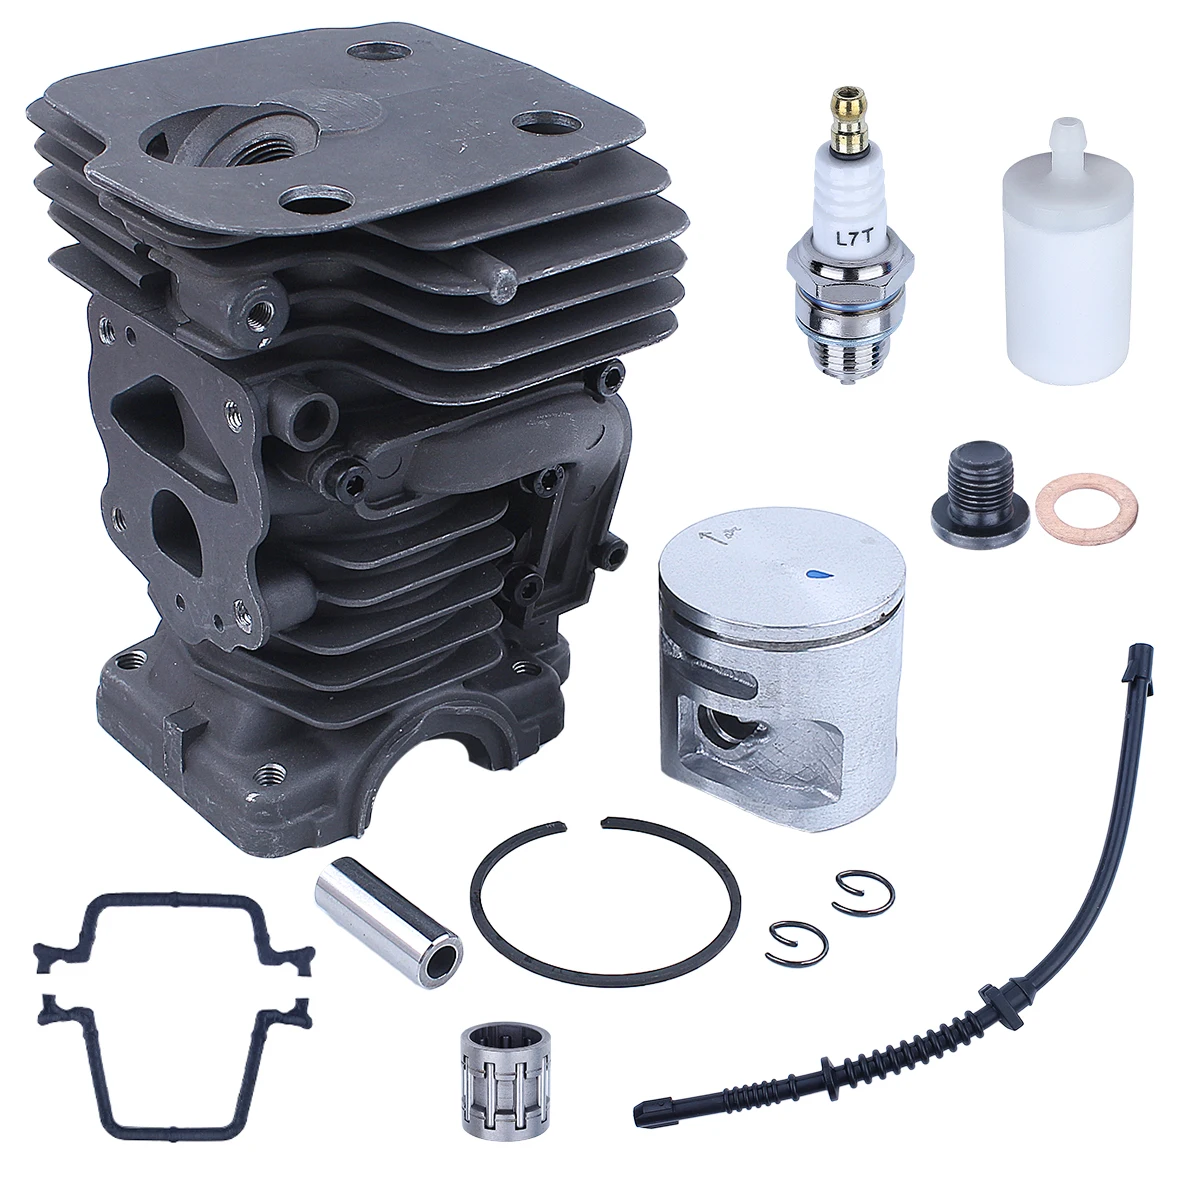 42mm Cylinder Piston Kit For Husqvarna 450 450 Rancher 445 E Chainsaw Replace 544119902 w Spark Plug Fuel Filter Line бензопила